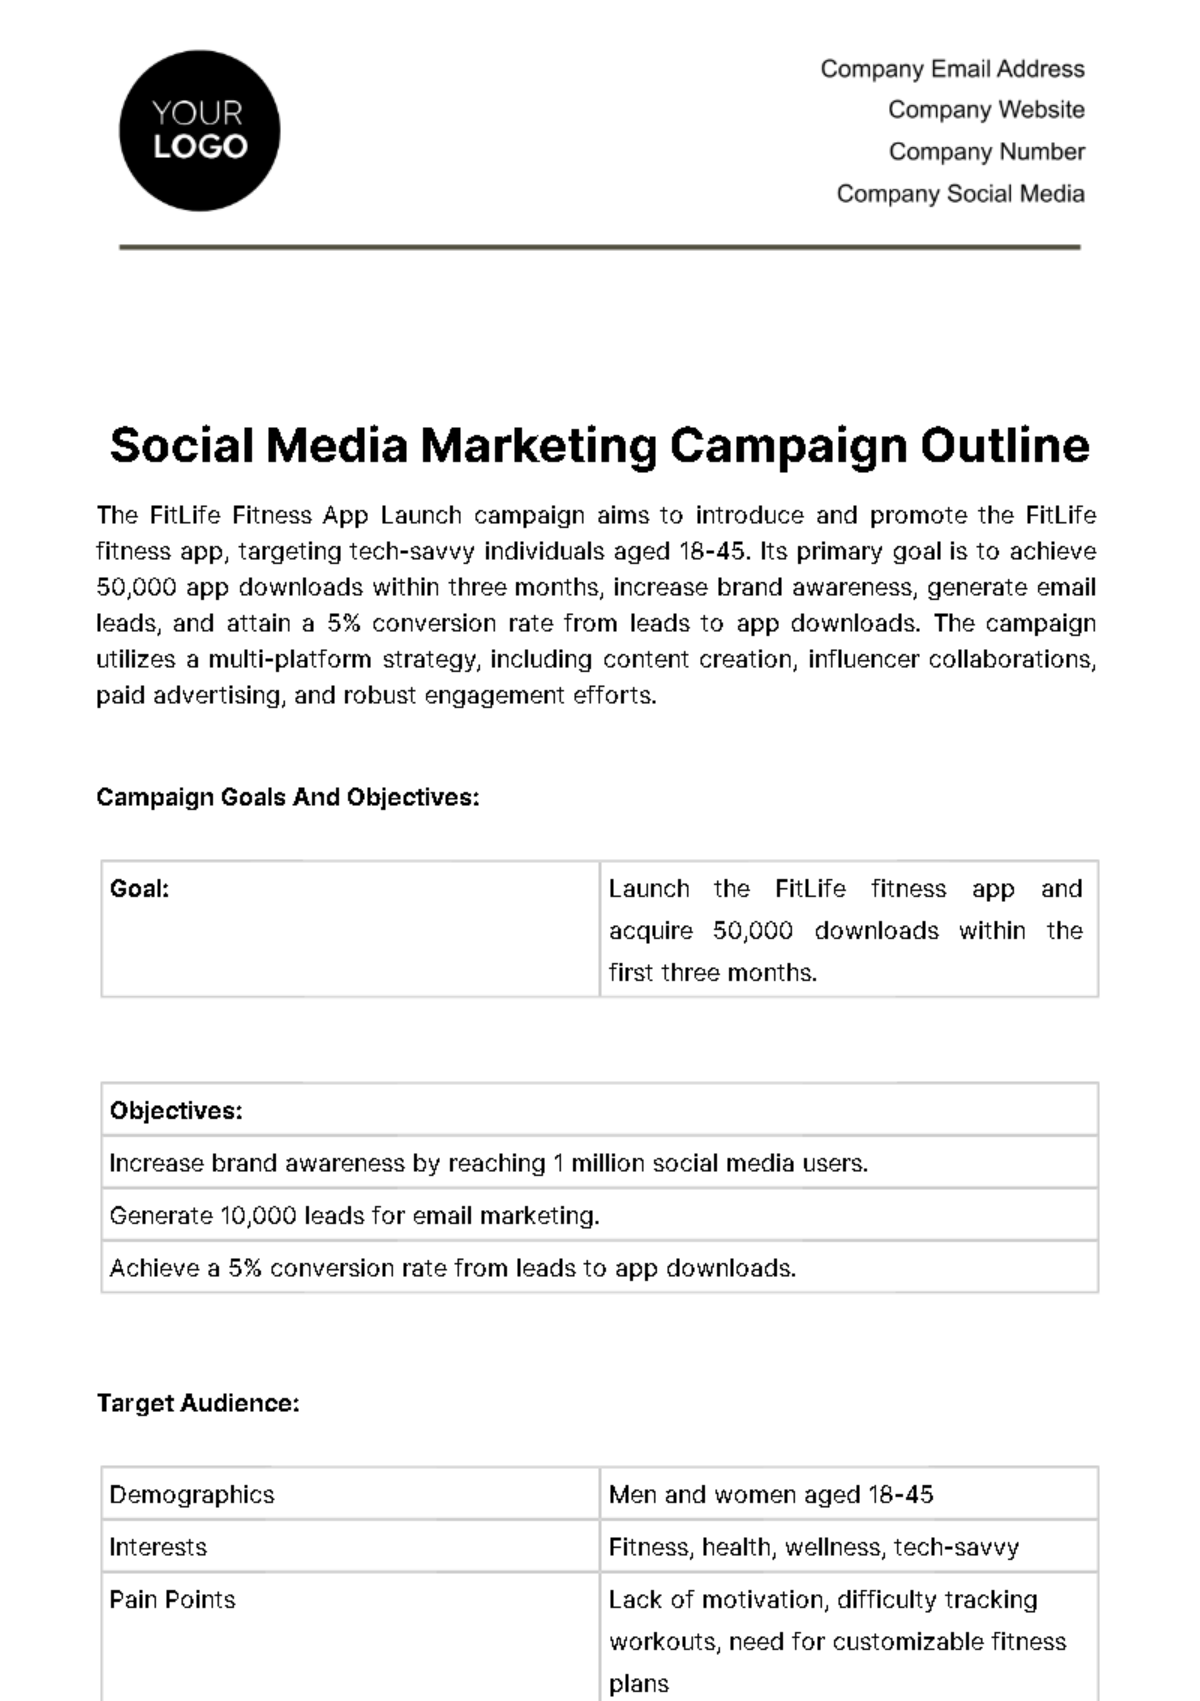 Free Social Media Marketing Campaign Outline Template